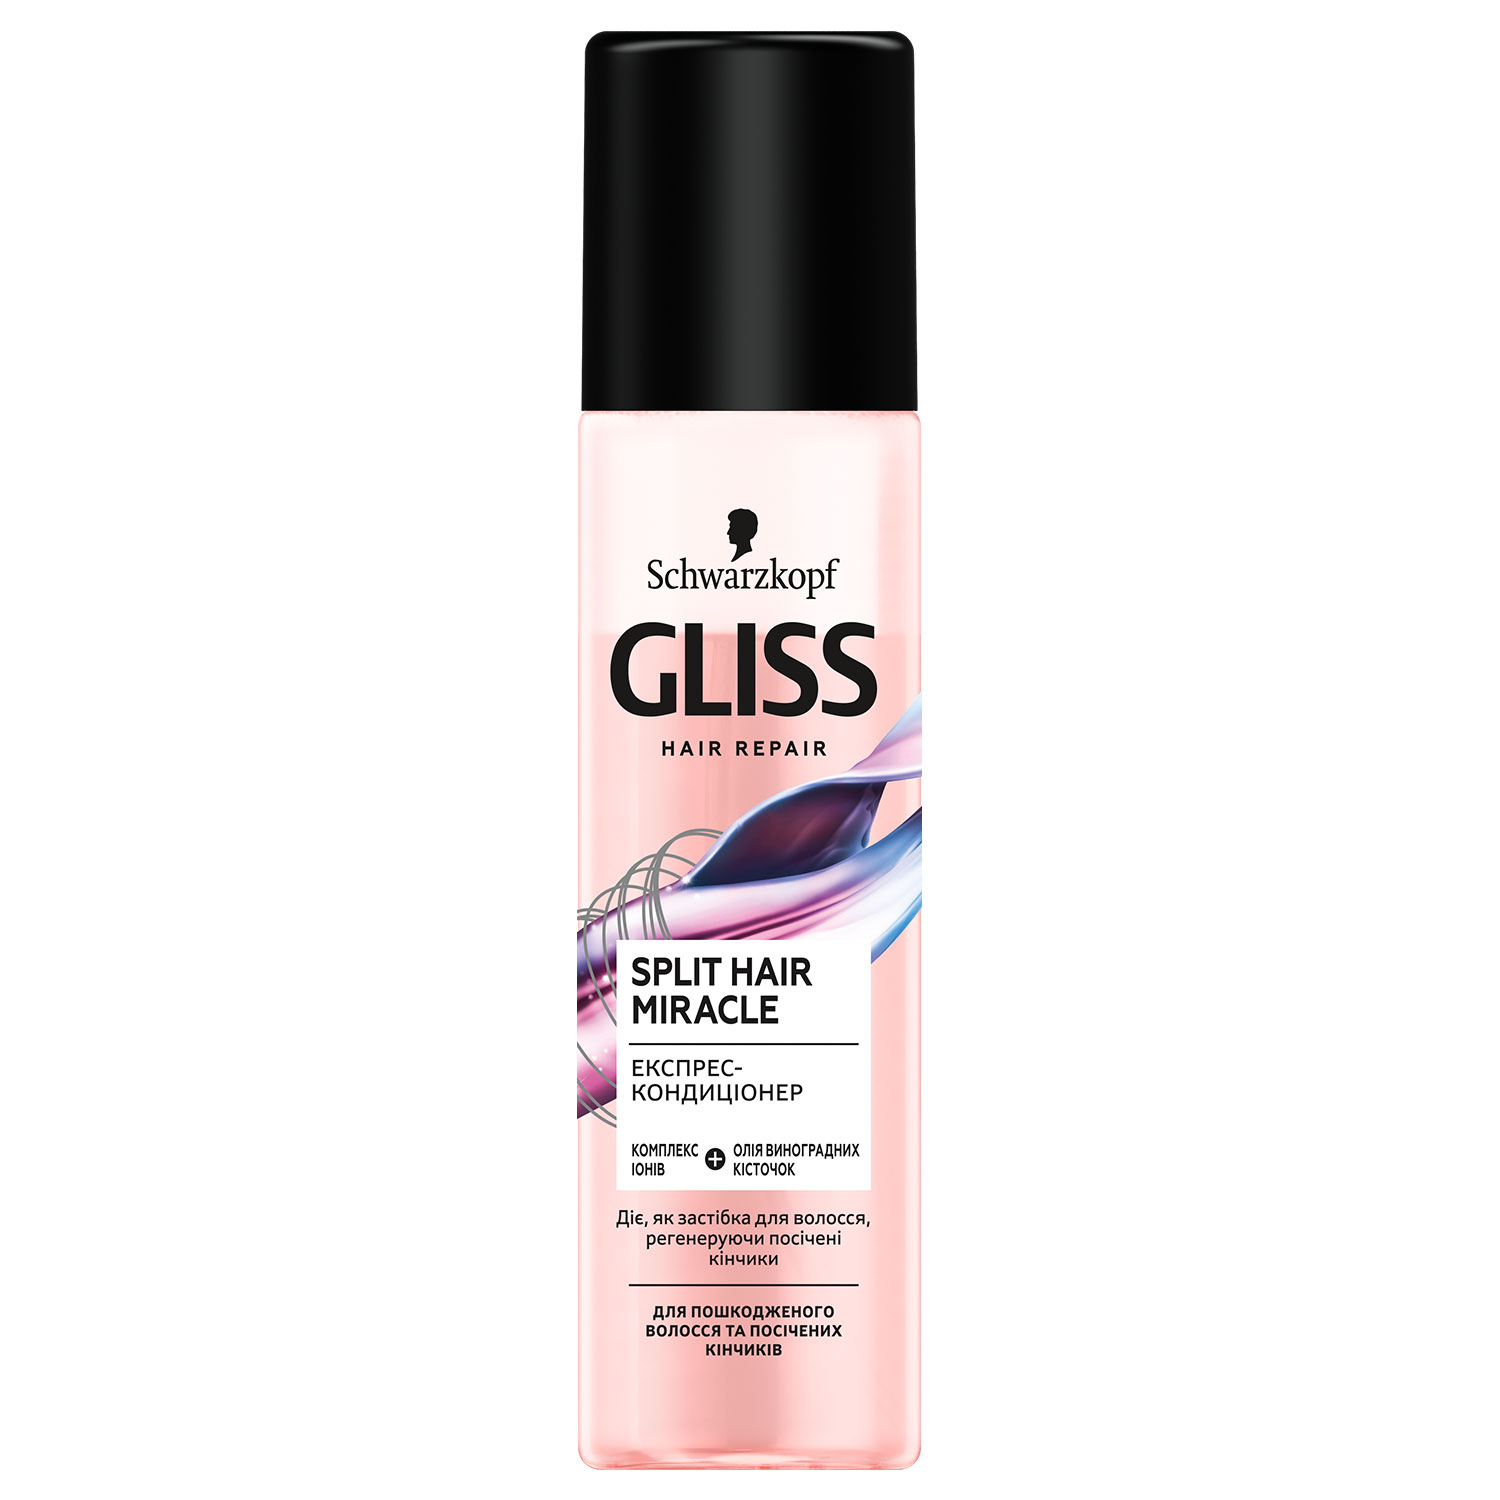 Express-Conditioner GLISS Split Hair Miracle 200 ml